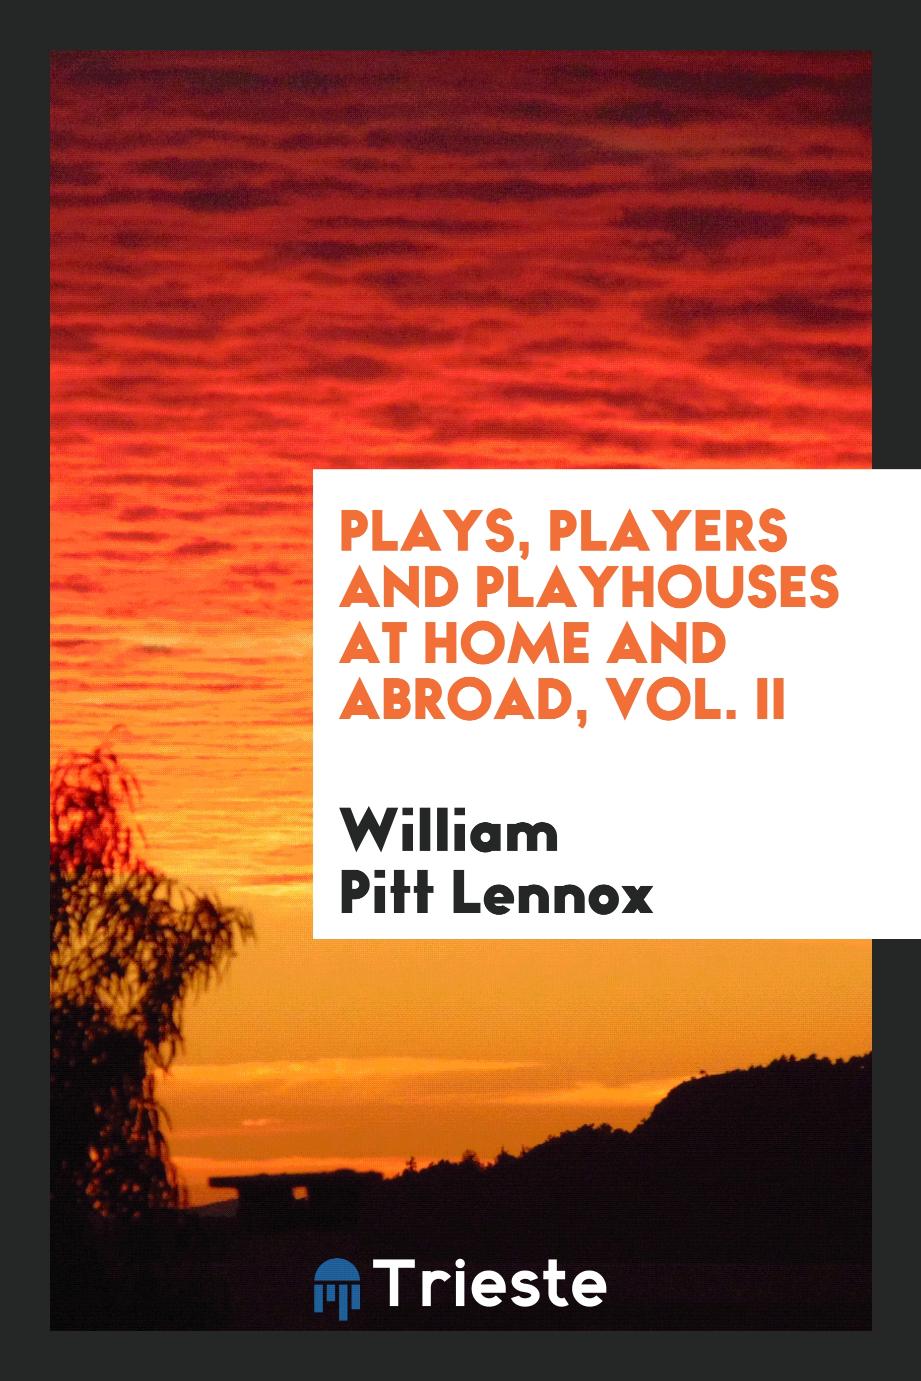 Plays, Players and Playhouses at Home and Abroad, Vol. II